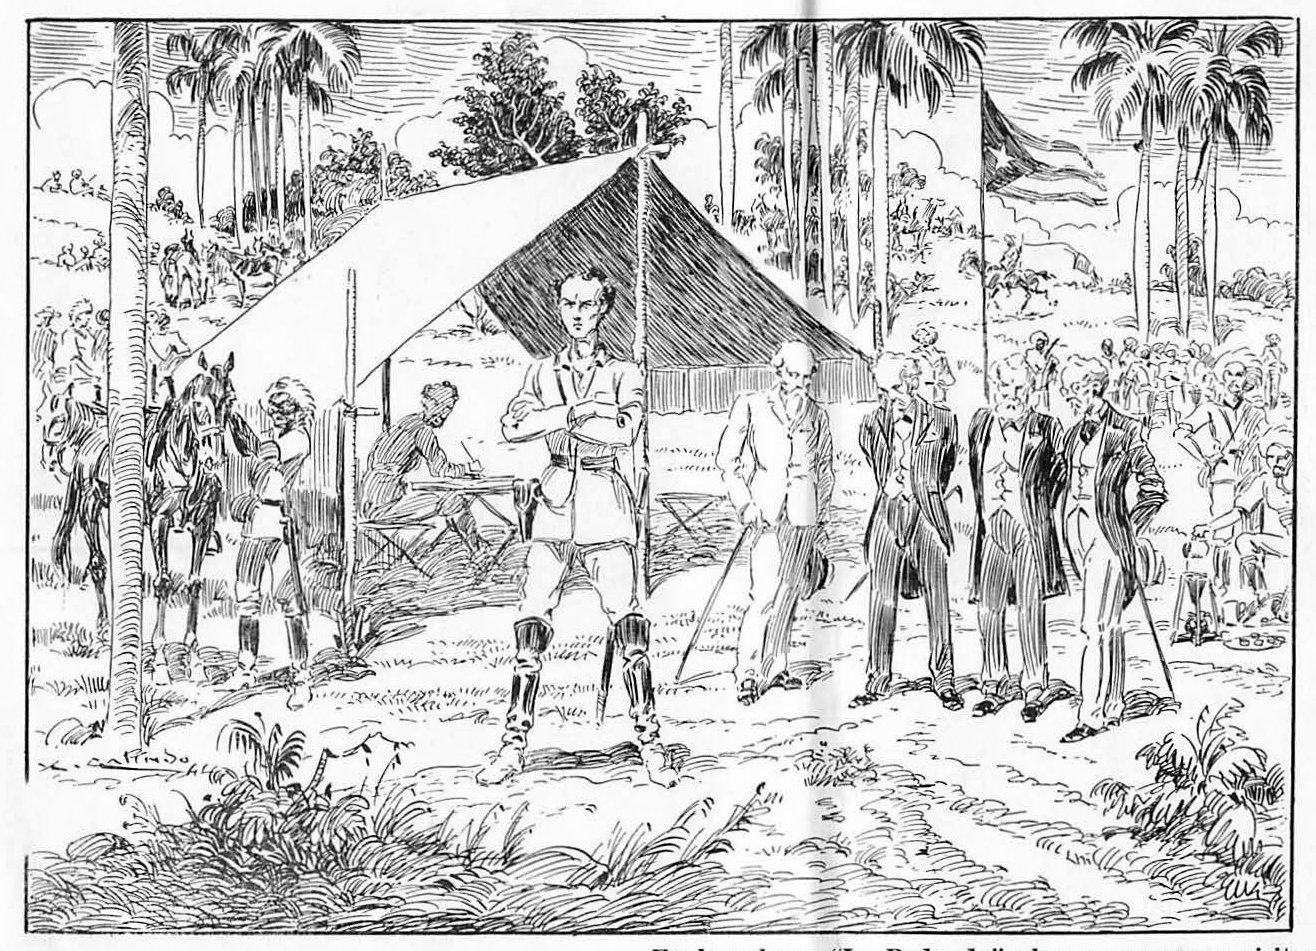 In camp at La Redonda, a delegation asks Major Ignacio Agramonte, “with what will you continue this bloody fight?” His famous response, “With the shame of the Cuban People!”